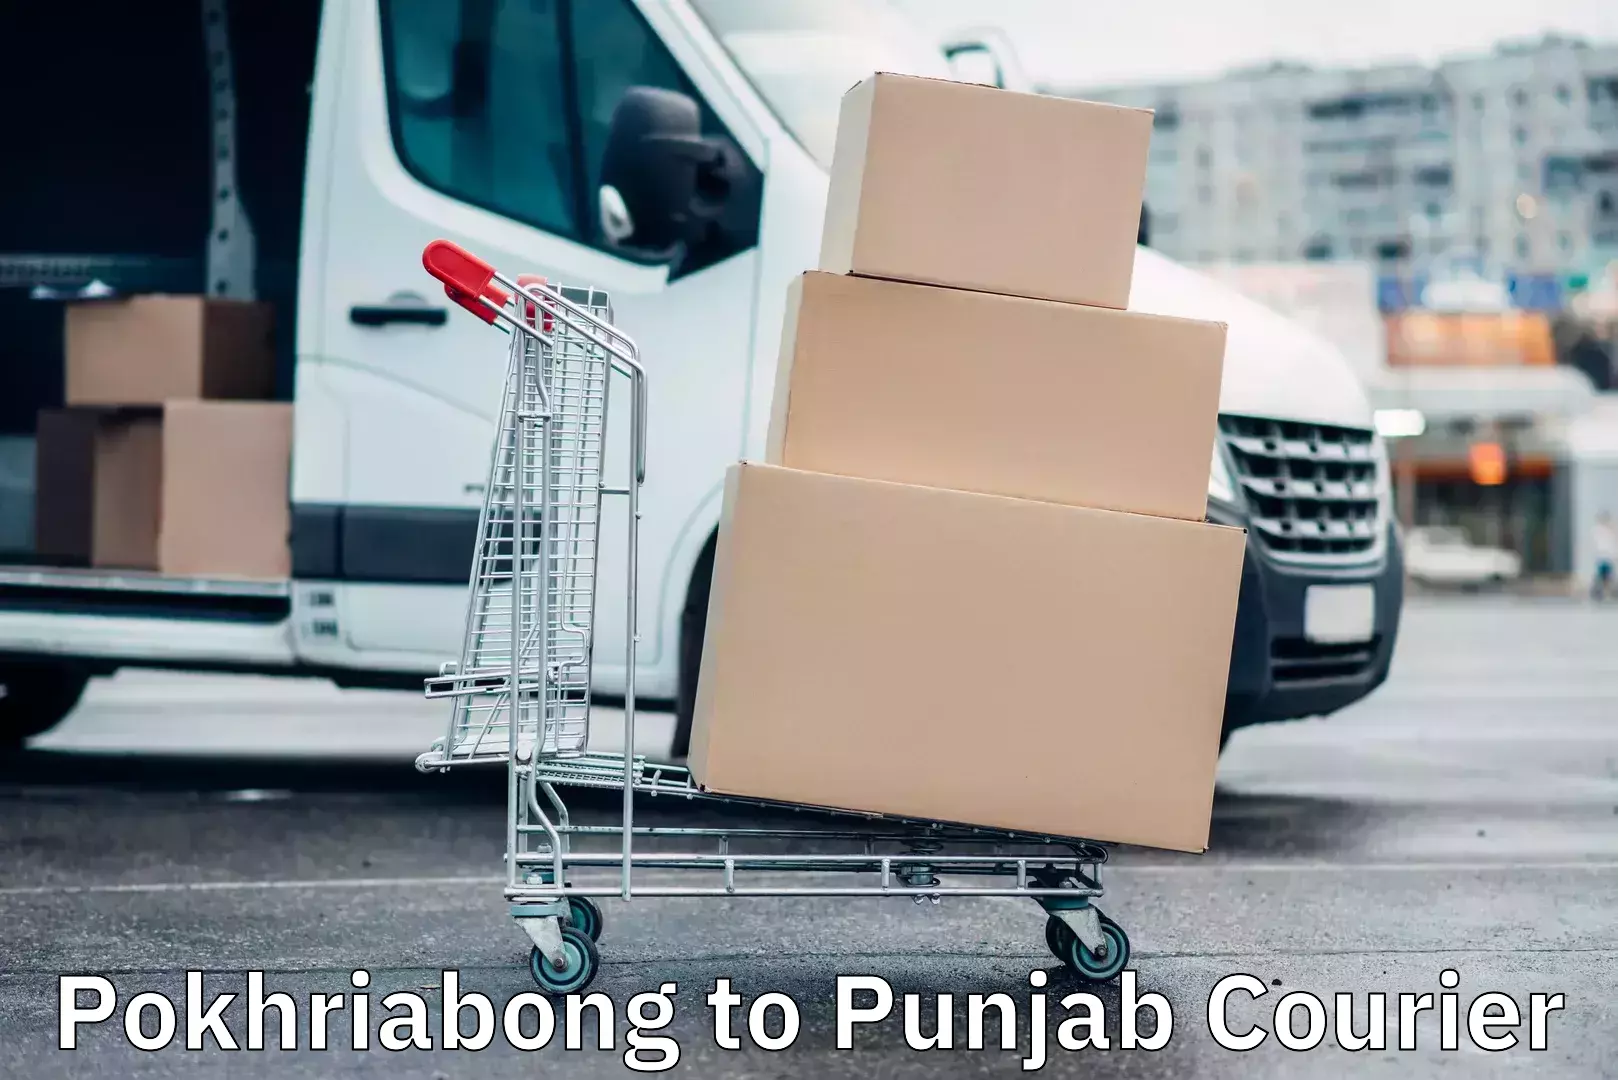 Express courier capabilities Pokhriabong to Punjab